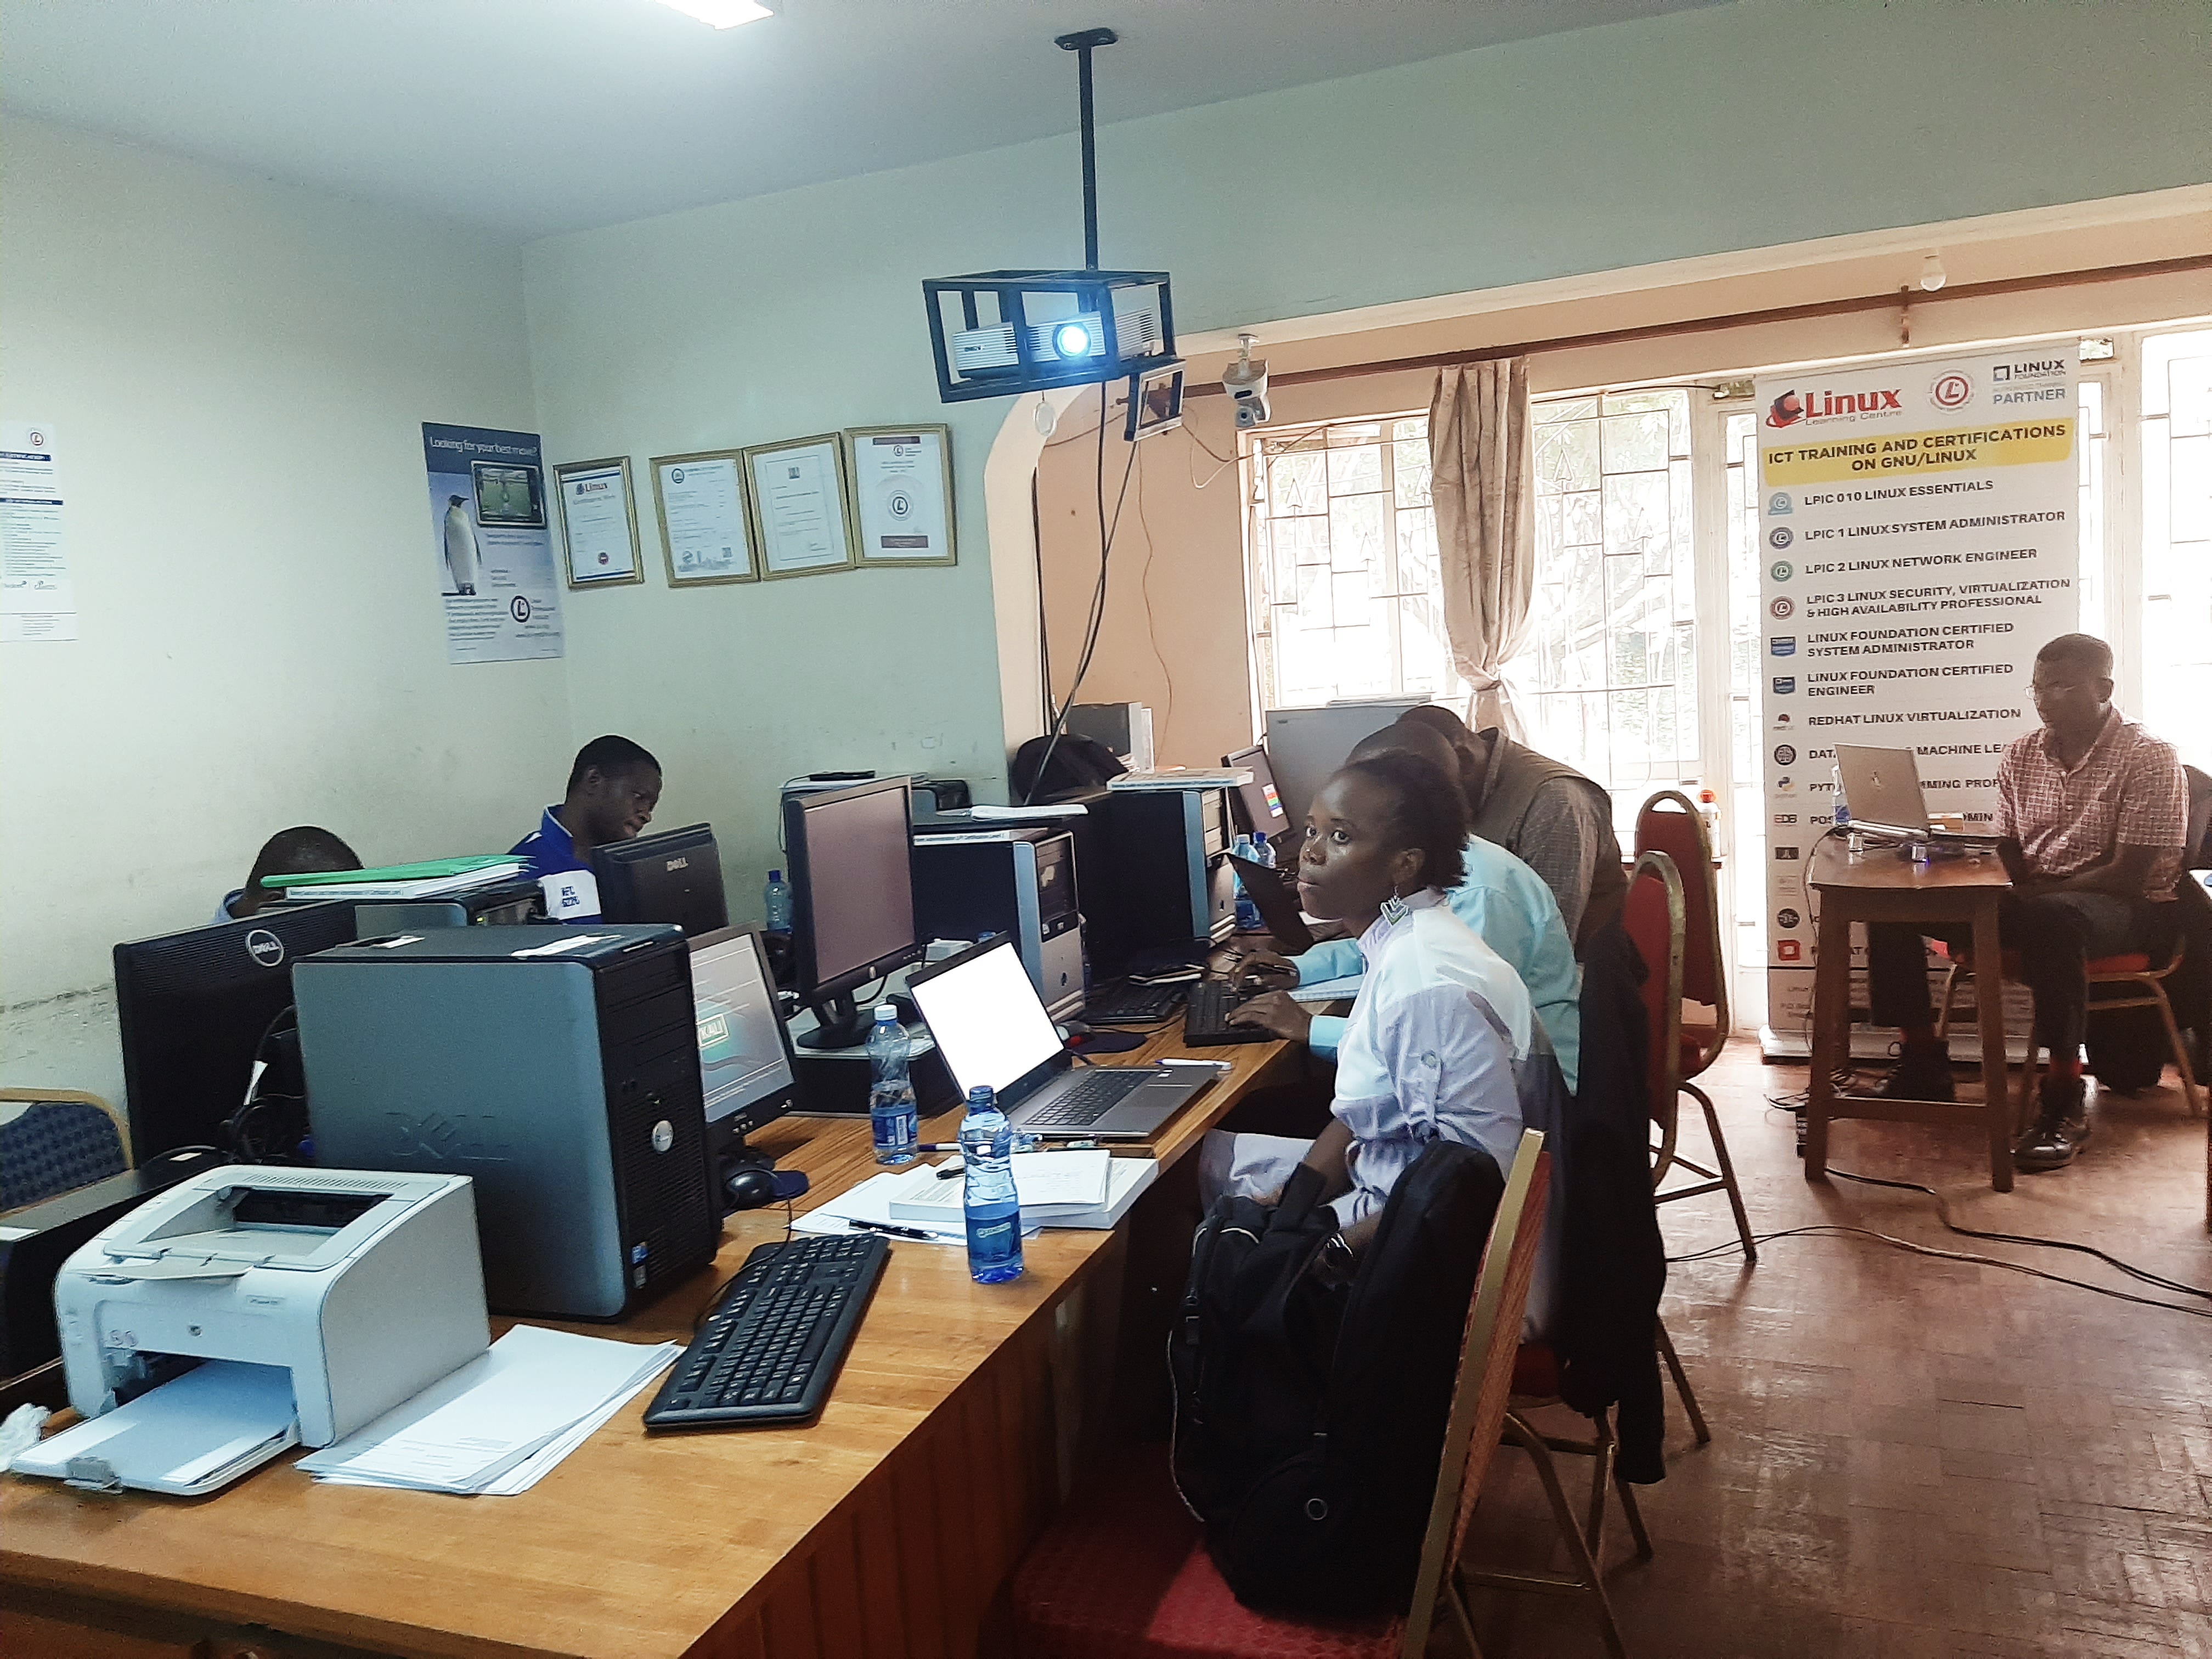 LPIC 1 Linux System Administration certification training in progress at Linux Learning Centre Ltd in January 2020.